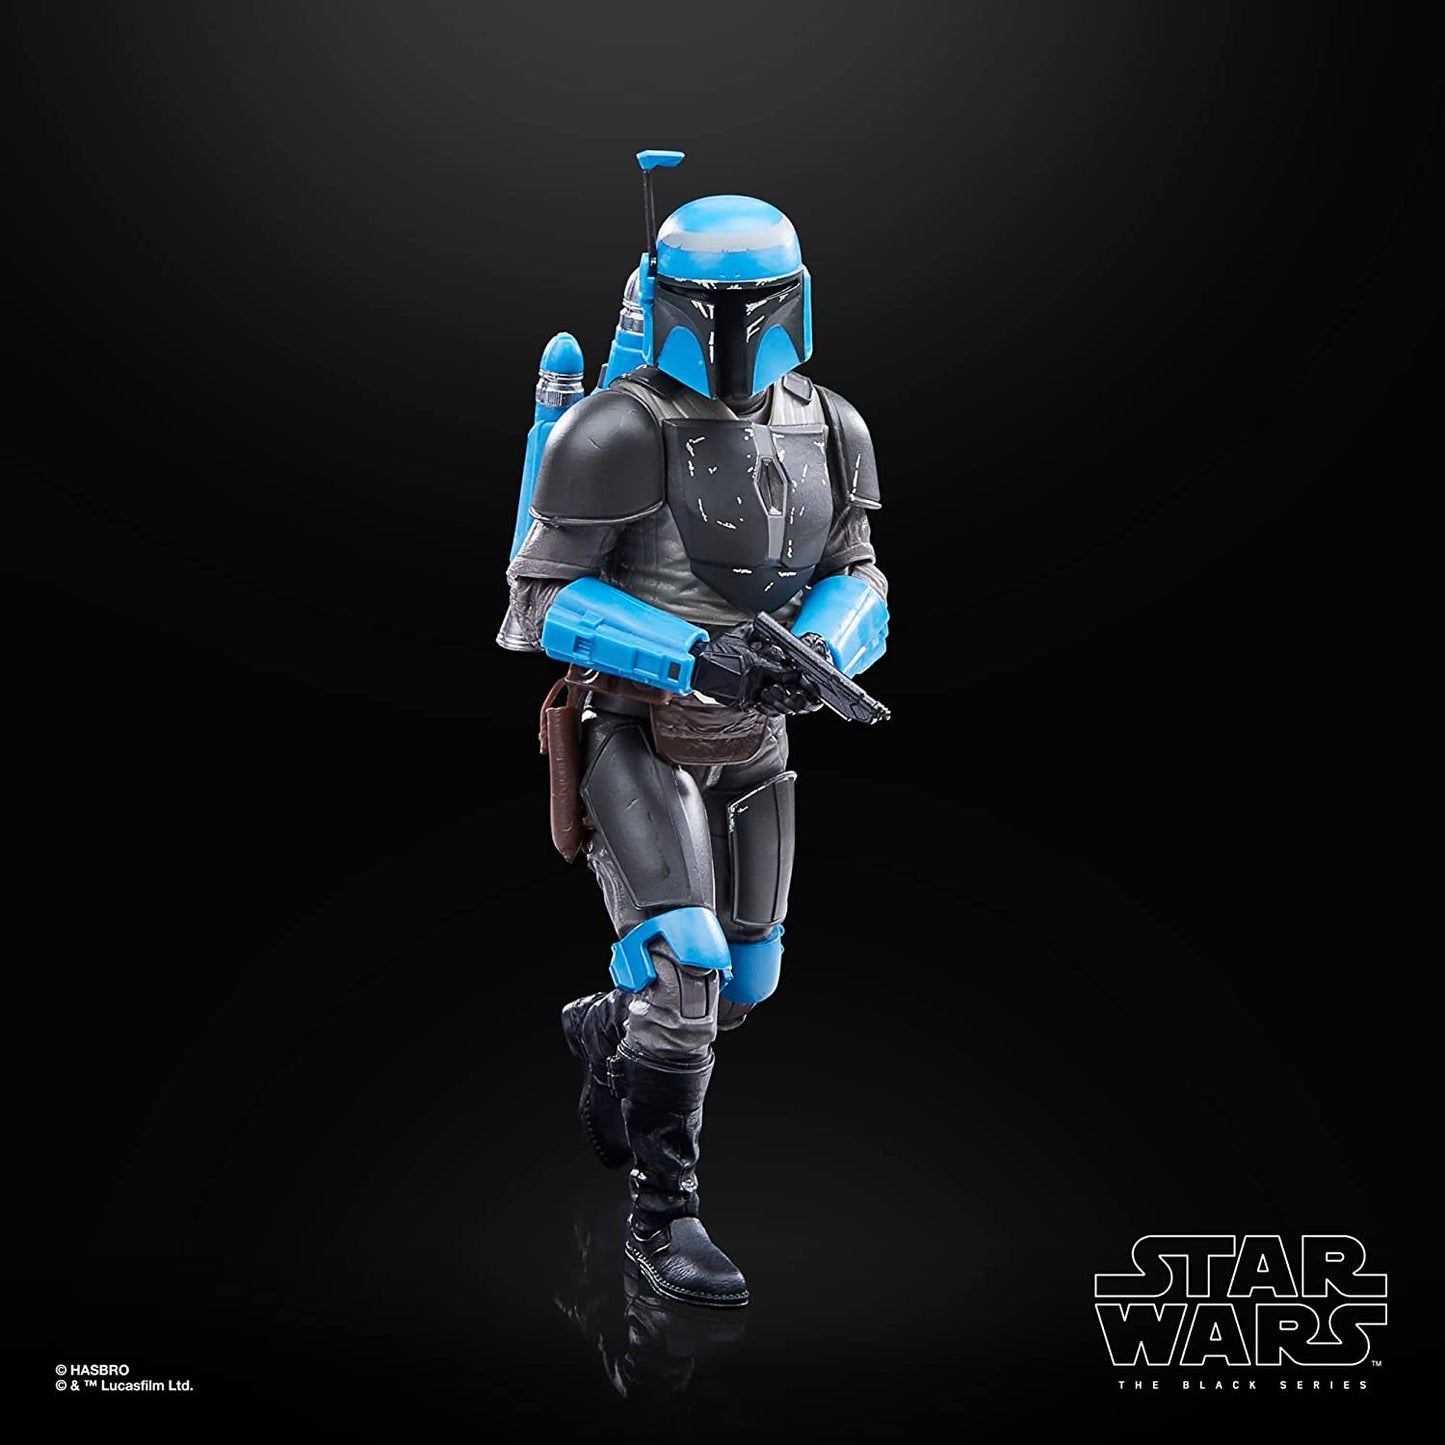 Star Wars The Black Series Axe Woves (The Mandalorian) 6-Inch Action Figure Toy